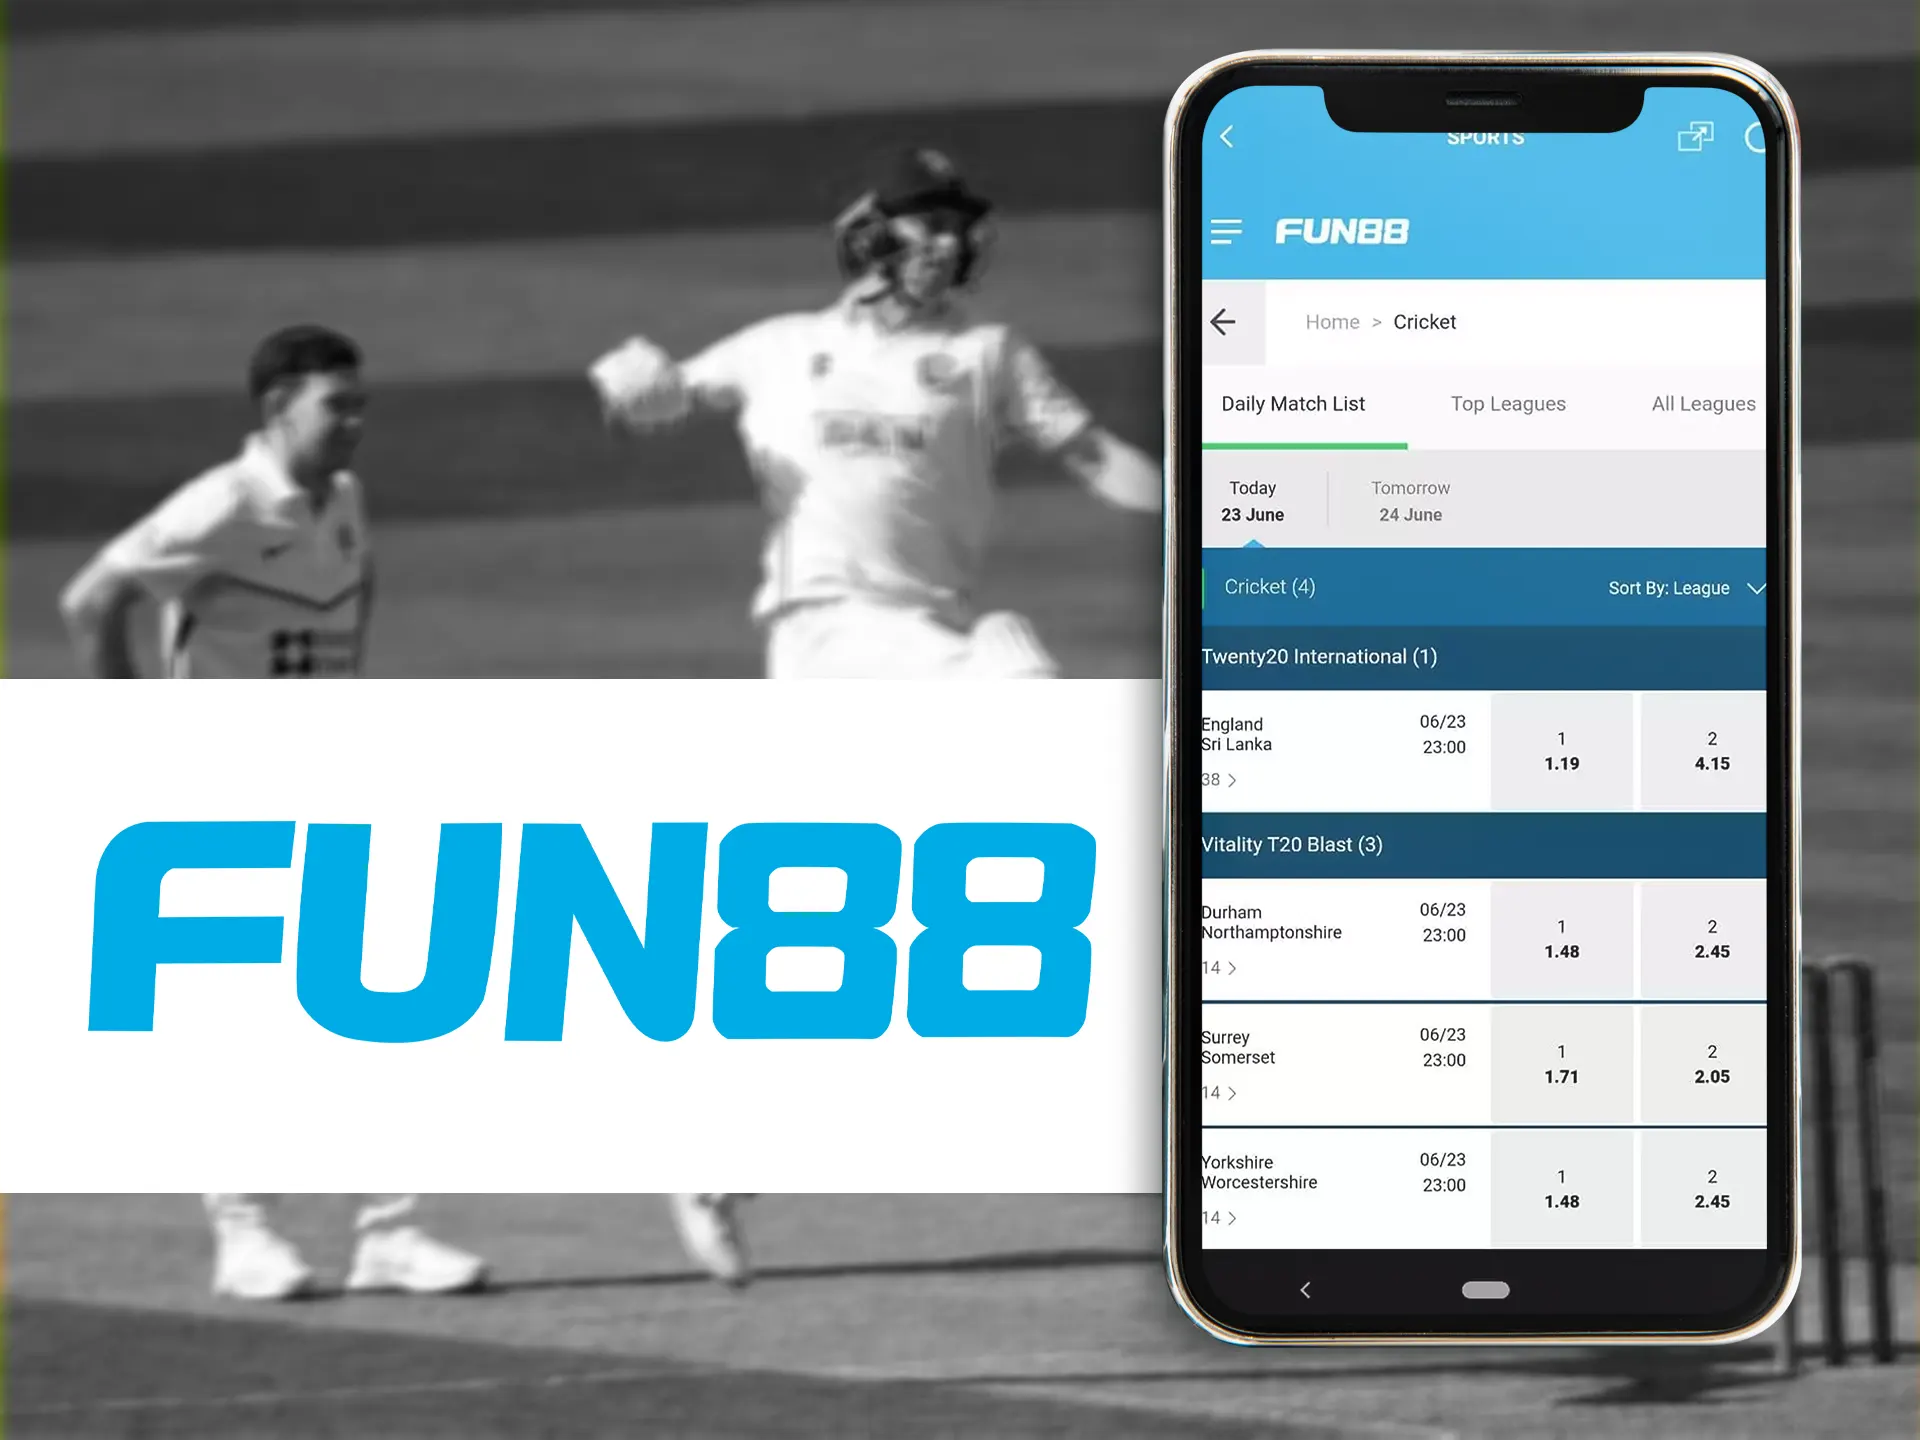 Install the Fun88 app on your smartphone and start betting whenever you want.